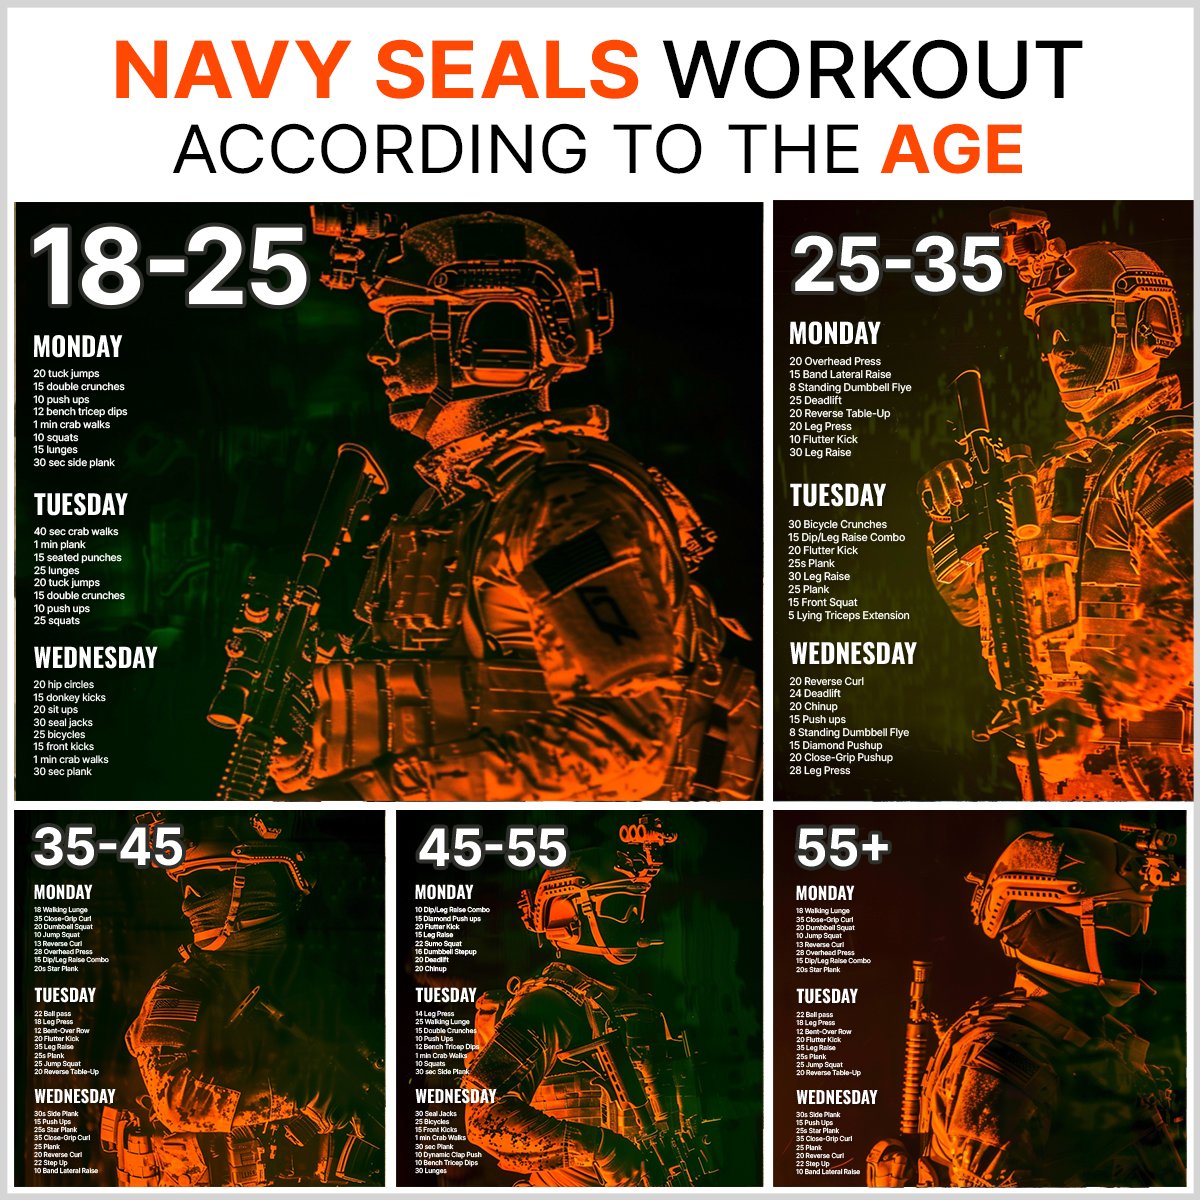 I have started following the online Navy SEALS workout routine. It’s OK, but the bucket of fish for breakfast is a bit off-putting ☹️